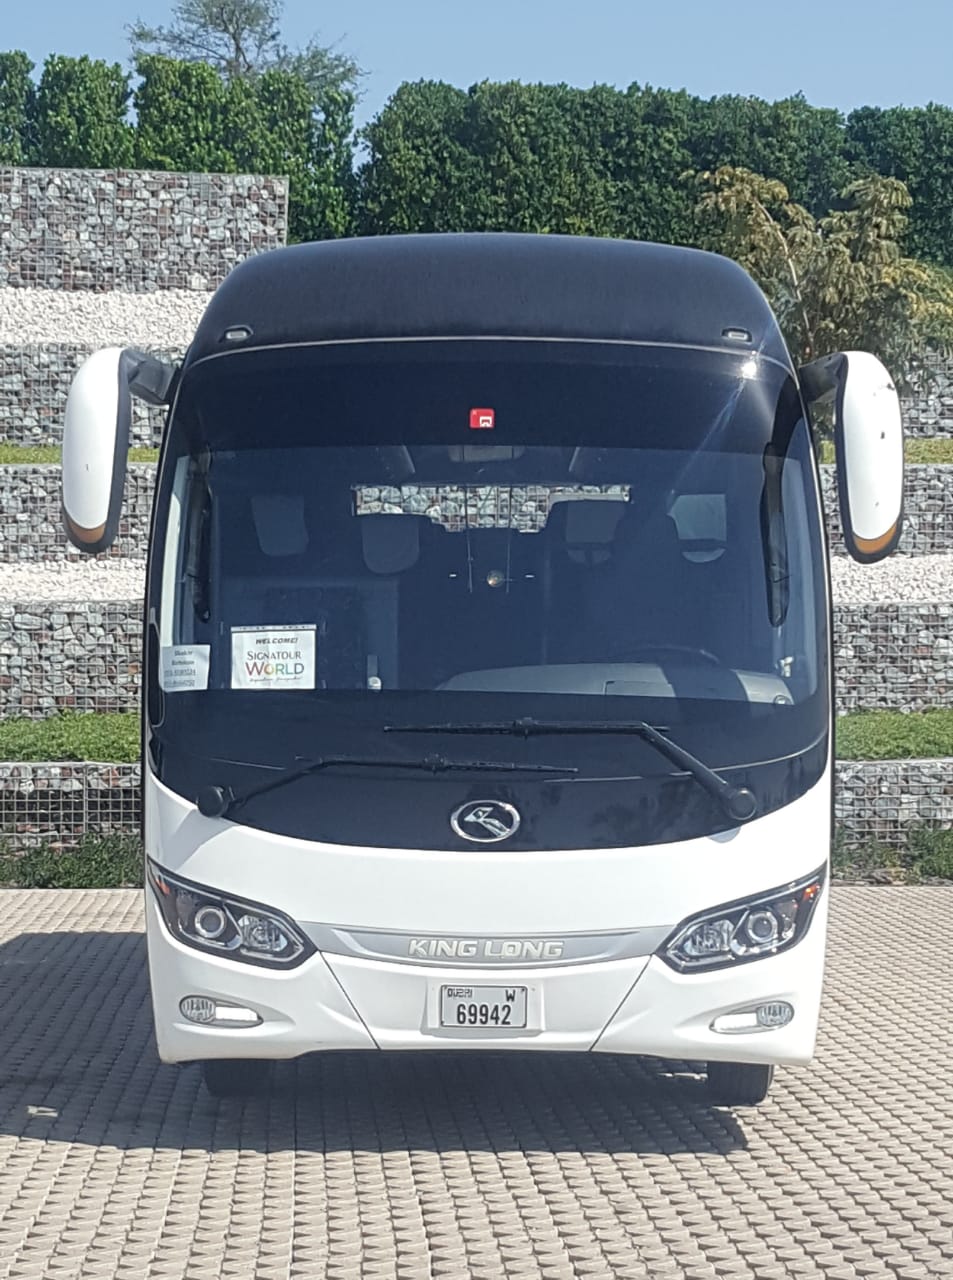 25 Seater Bus